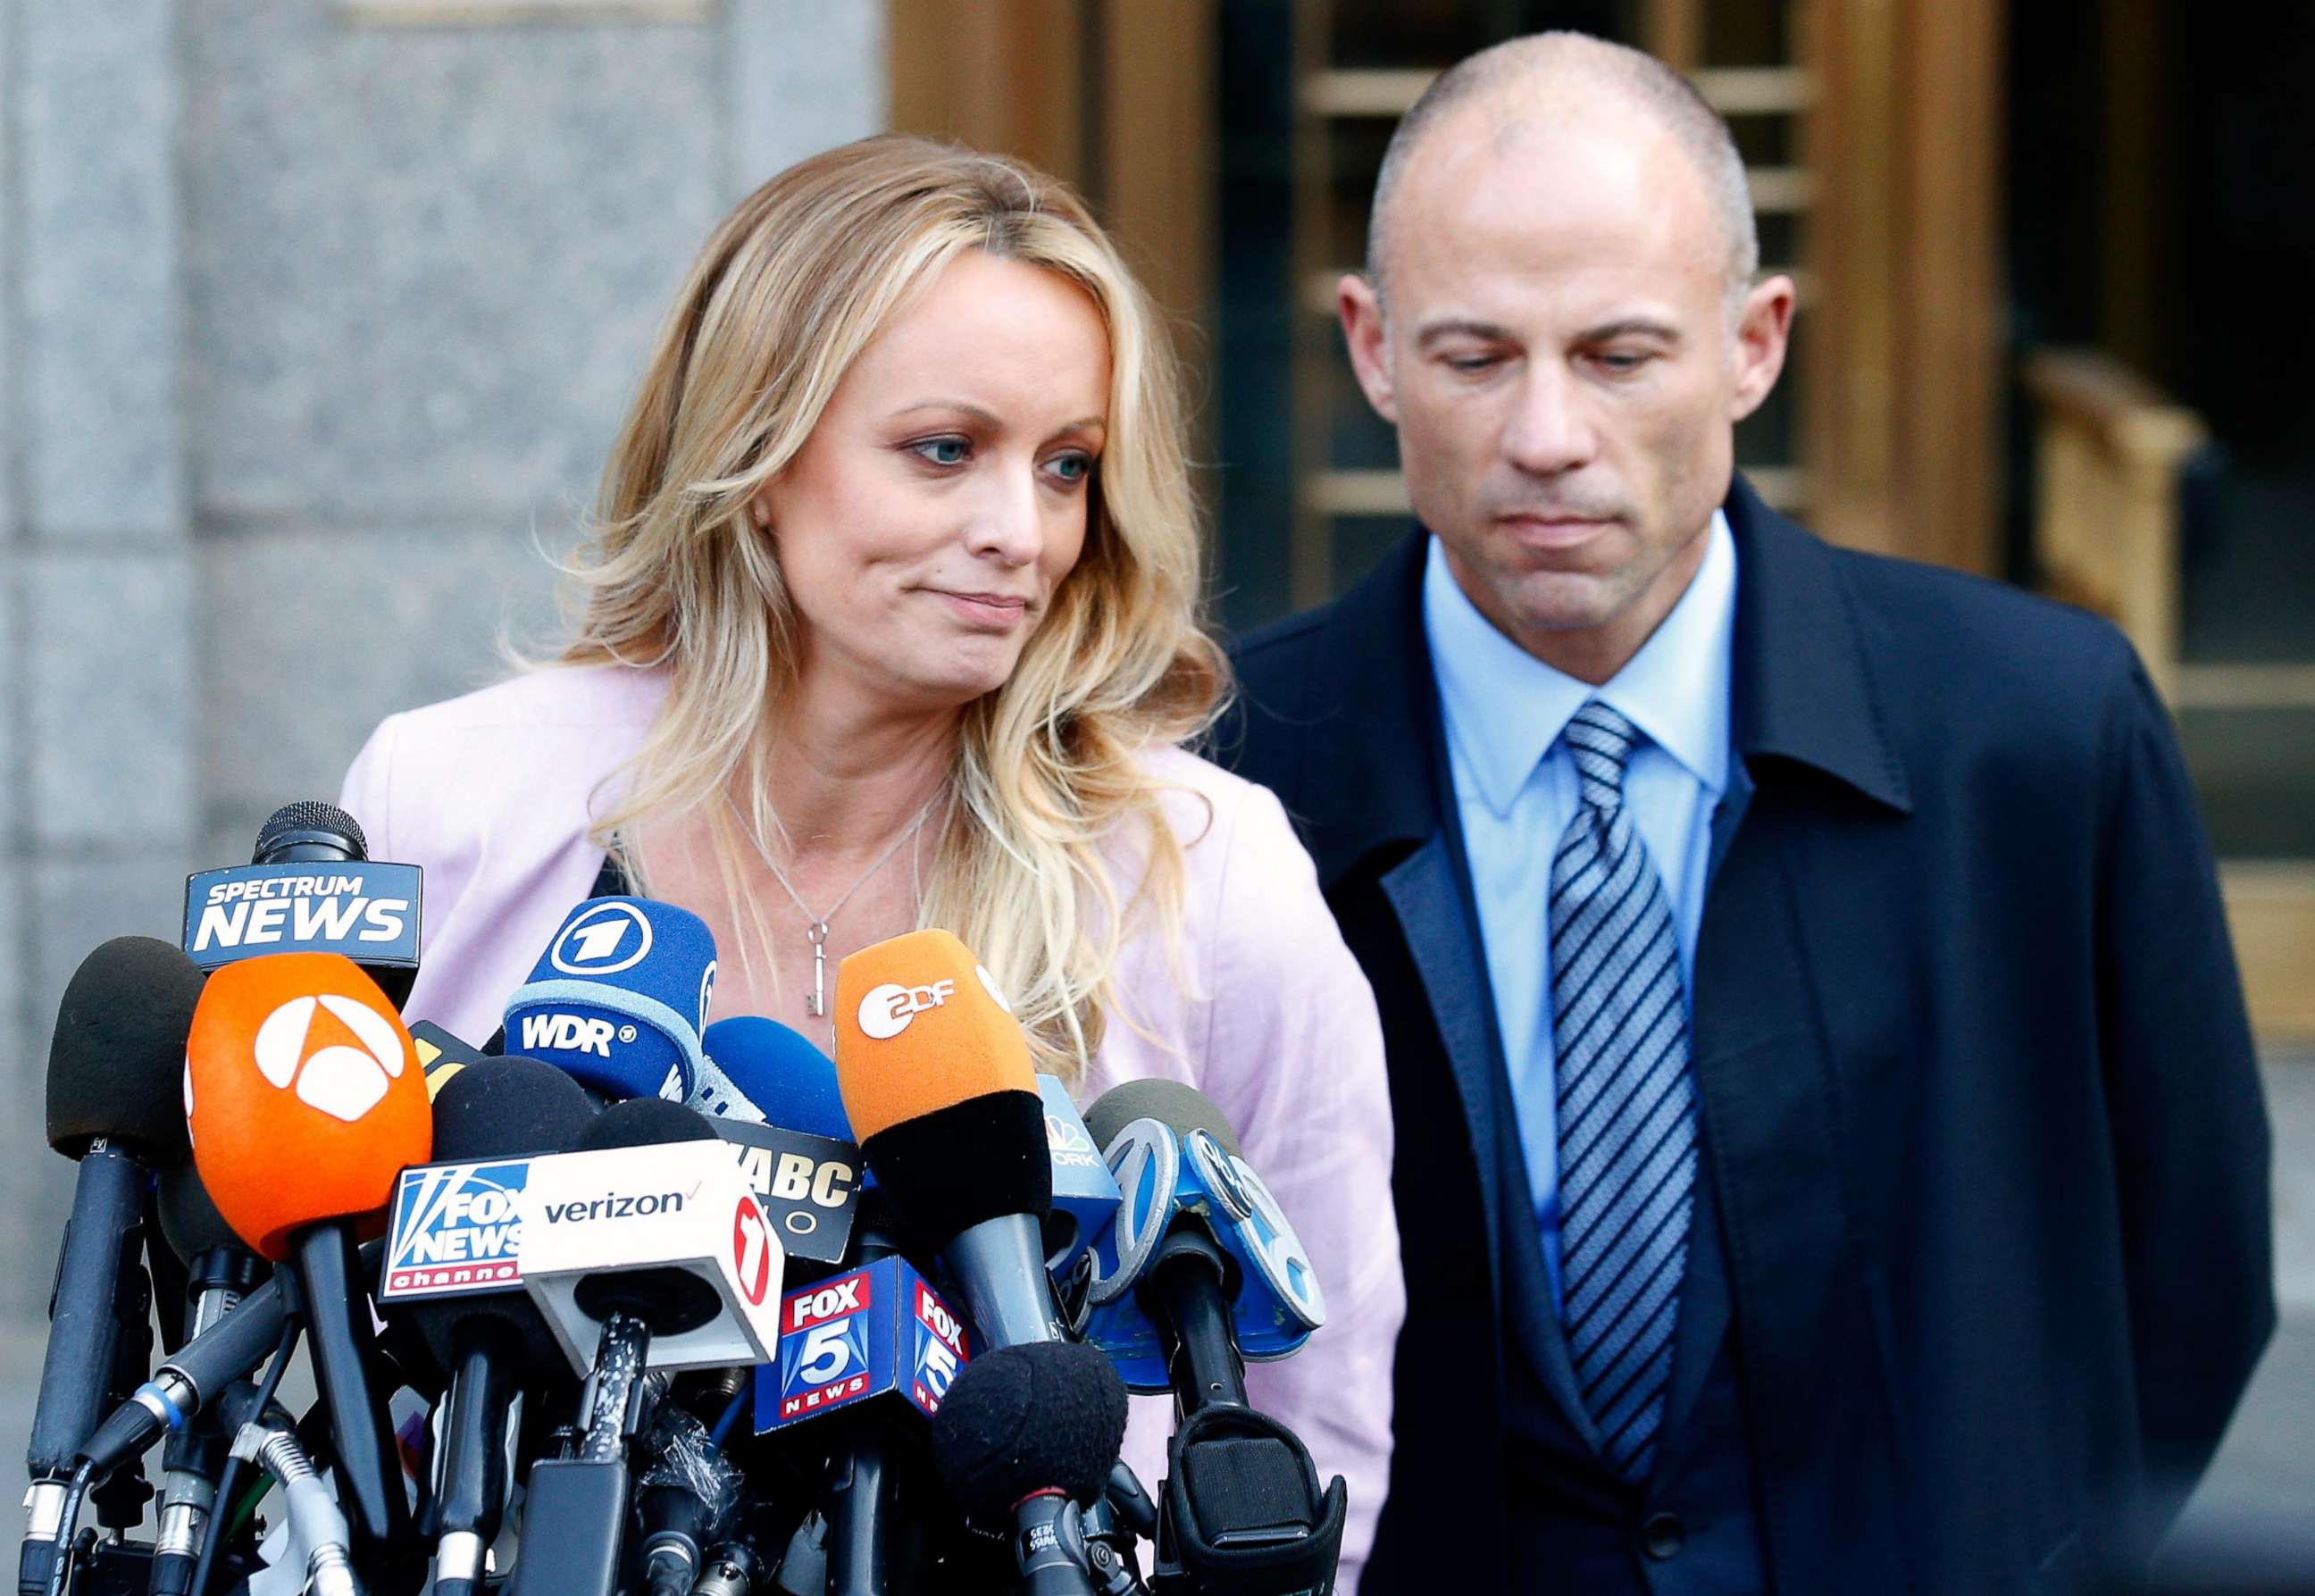 PHOTO: Adult film actress Stephanie Clifford, also known as Stormy Daniels, speaks to media along with lawyer Michael Avenatti (R) outside federal court in New York, April 16, 2018.